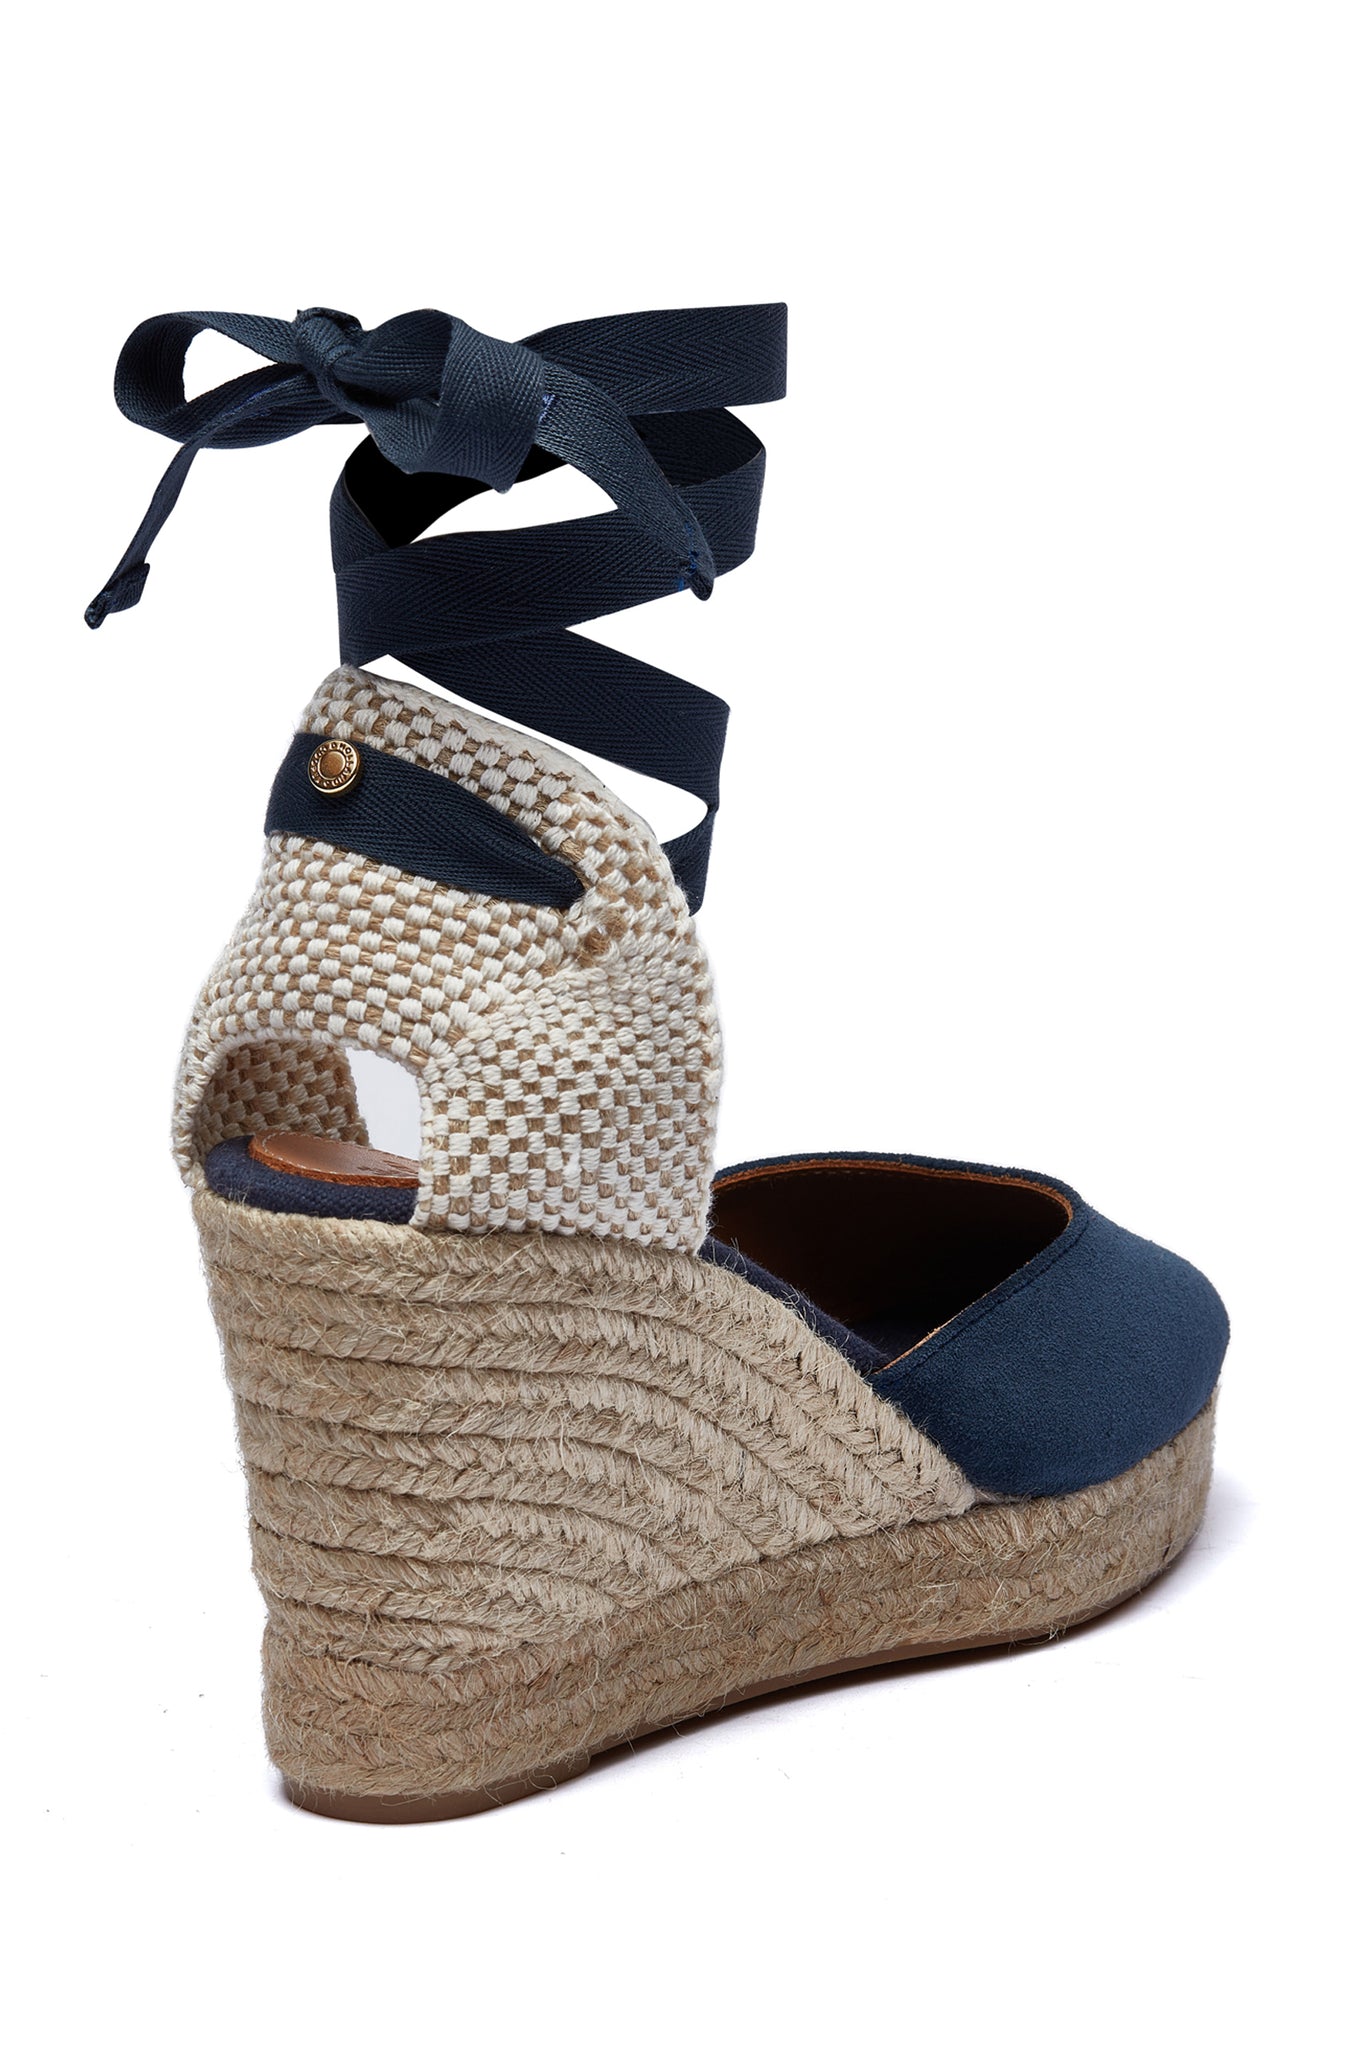 Back of 4 inch braided jute wedge heel with navy suede top and tie up navy ribbons around the ankle with gold hardware to the back.